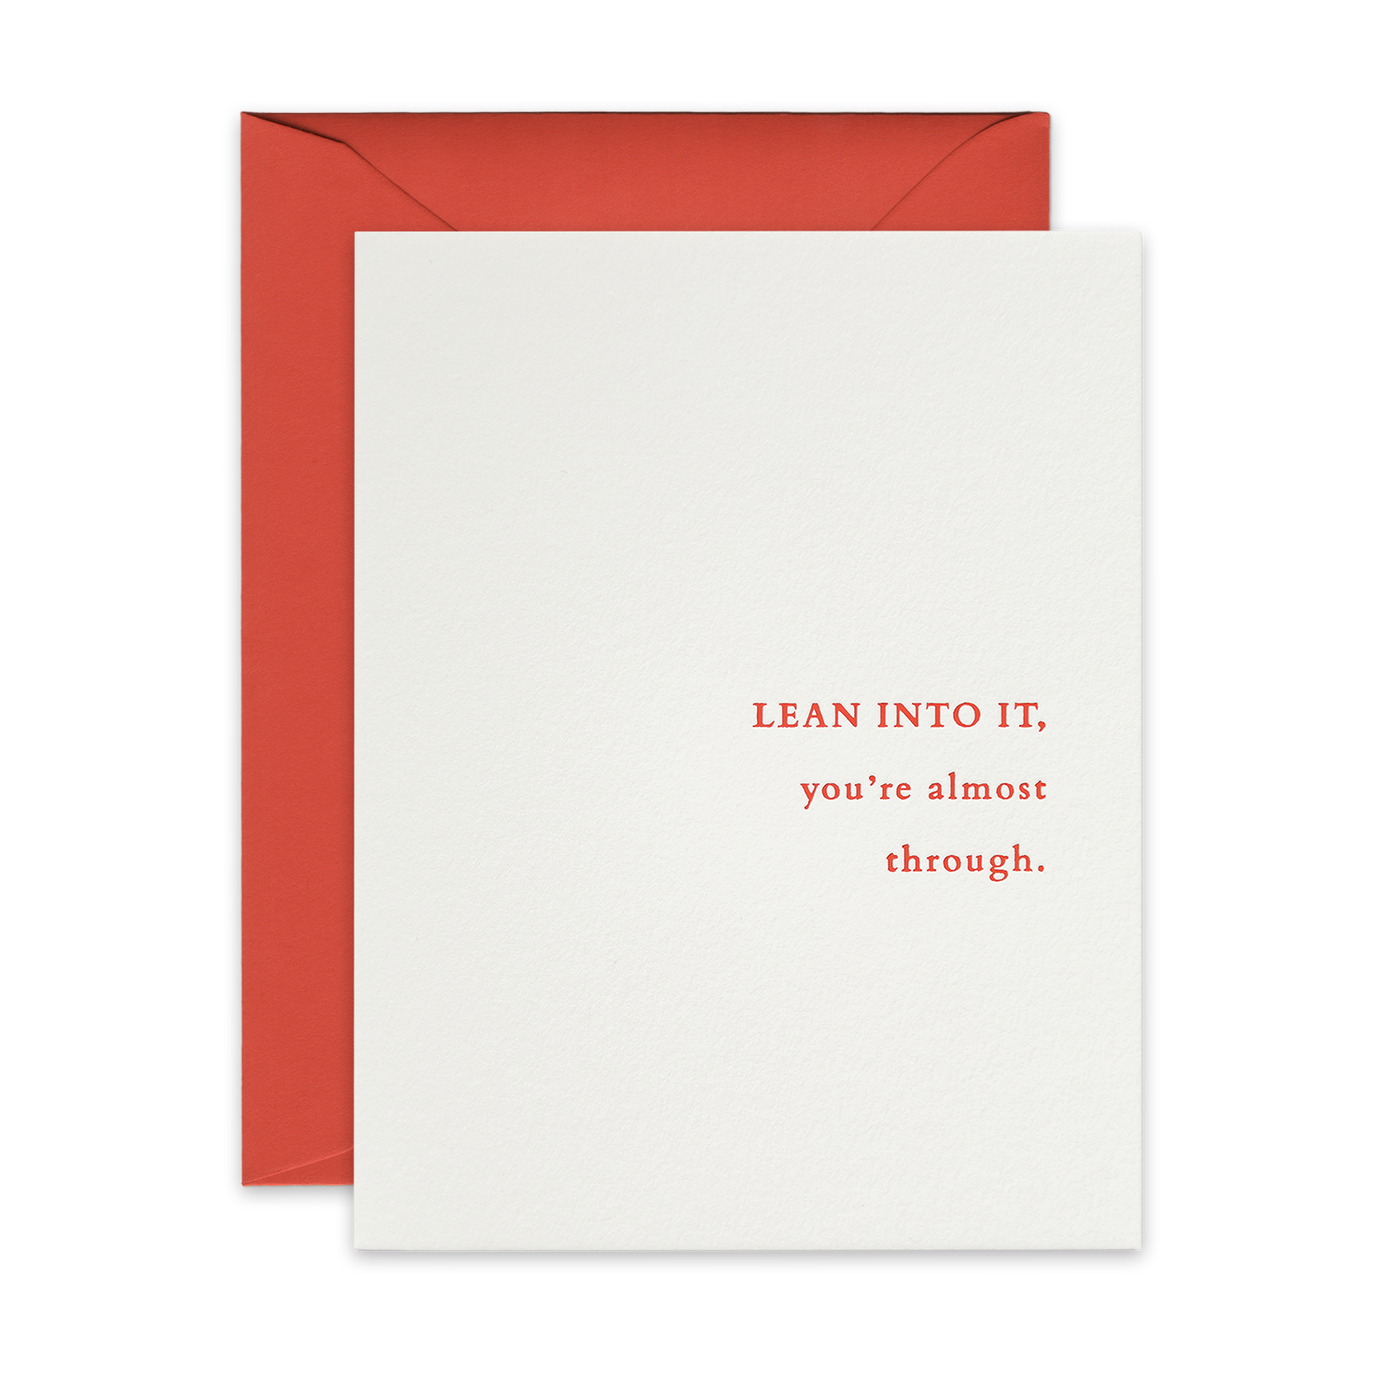 Peach foil letterpress greeting card by beknown. Lean into it, you're almost through.